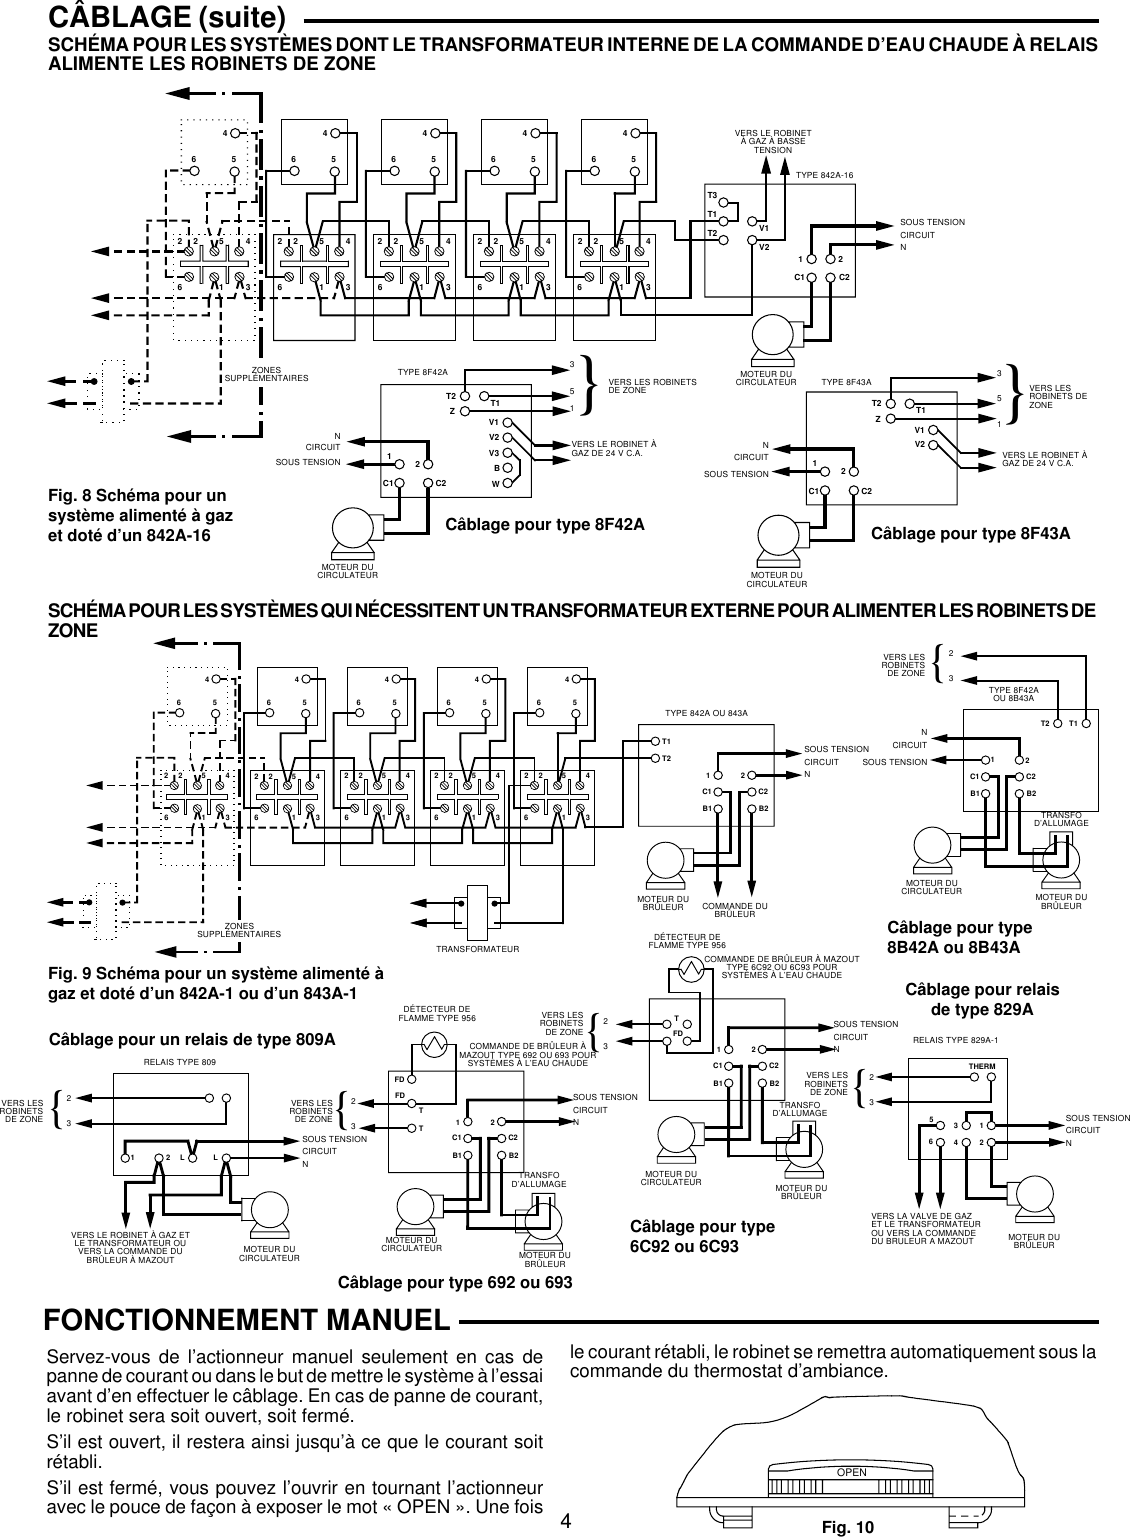 Page 8 of 8 - White-Rodgers White-Rodgers-1361-104-Hydronic-Zone-Controls-Installation-Instructions- 37-5422B (1361)  White-rodgers-1361-104-hydronic-zone-controls-installation-instructions